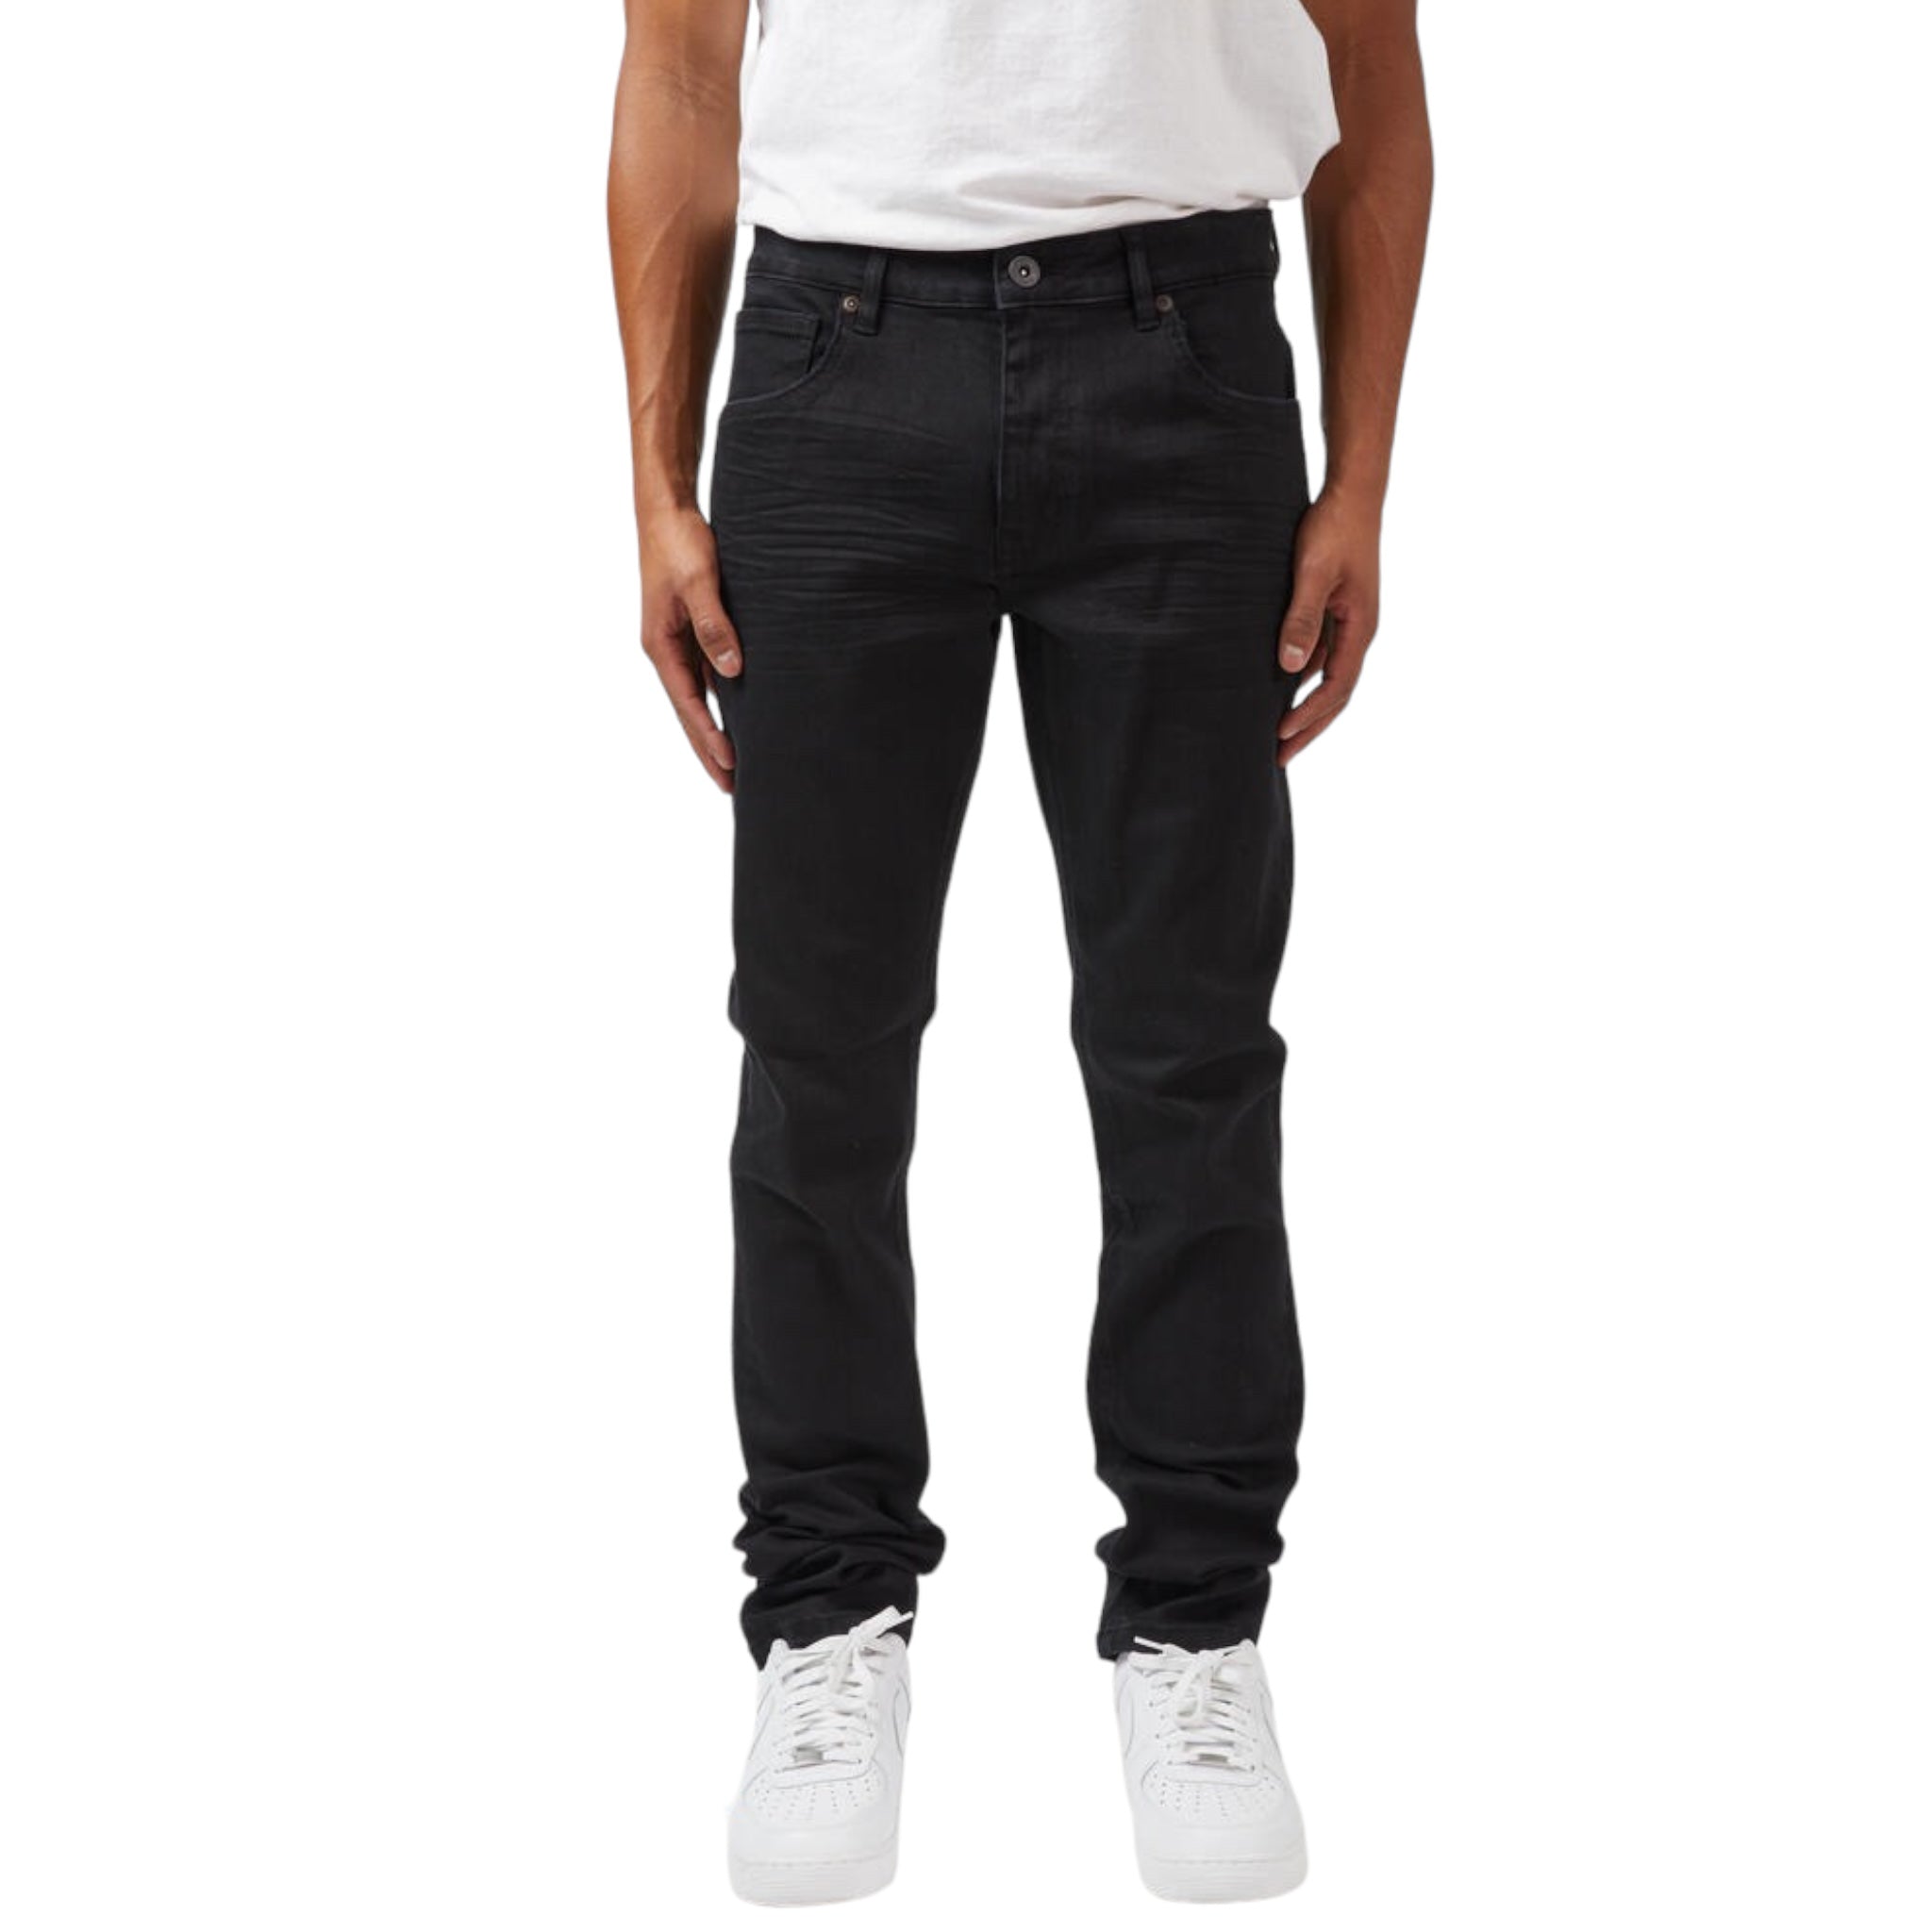 M. SOCIETY: Tapered Fit Jeans MS-80275